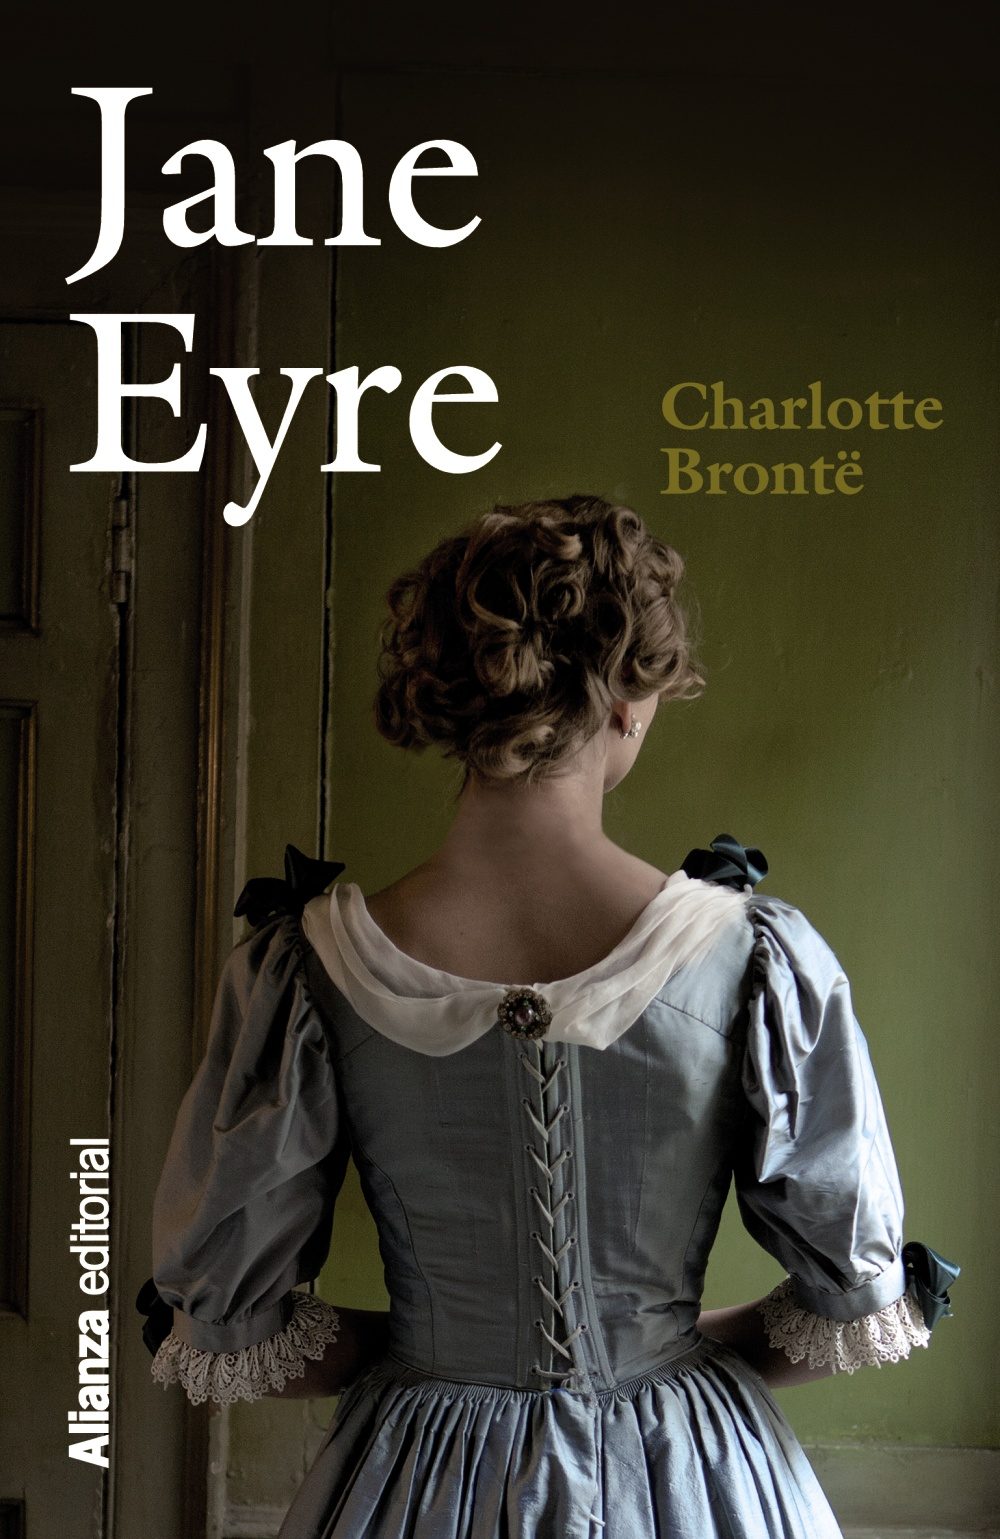 book review of jane eyre by charlotte bronte